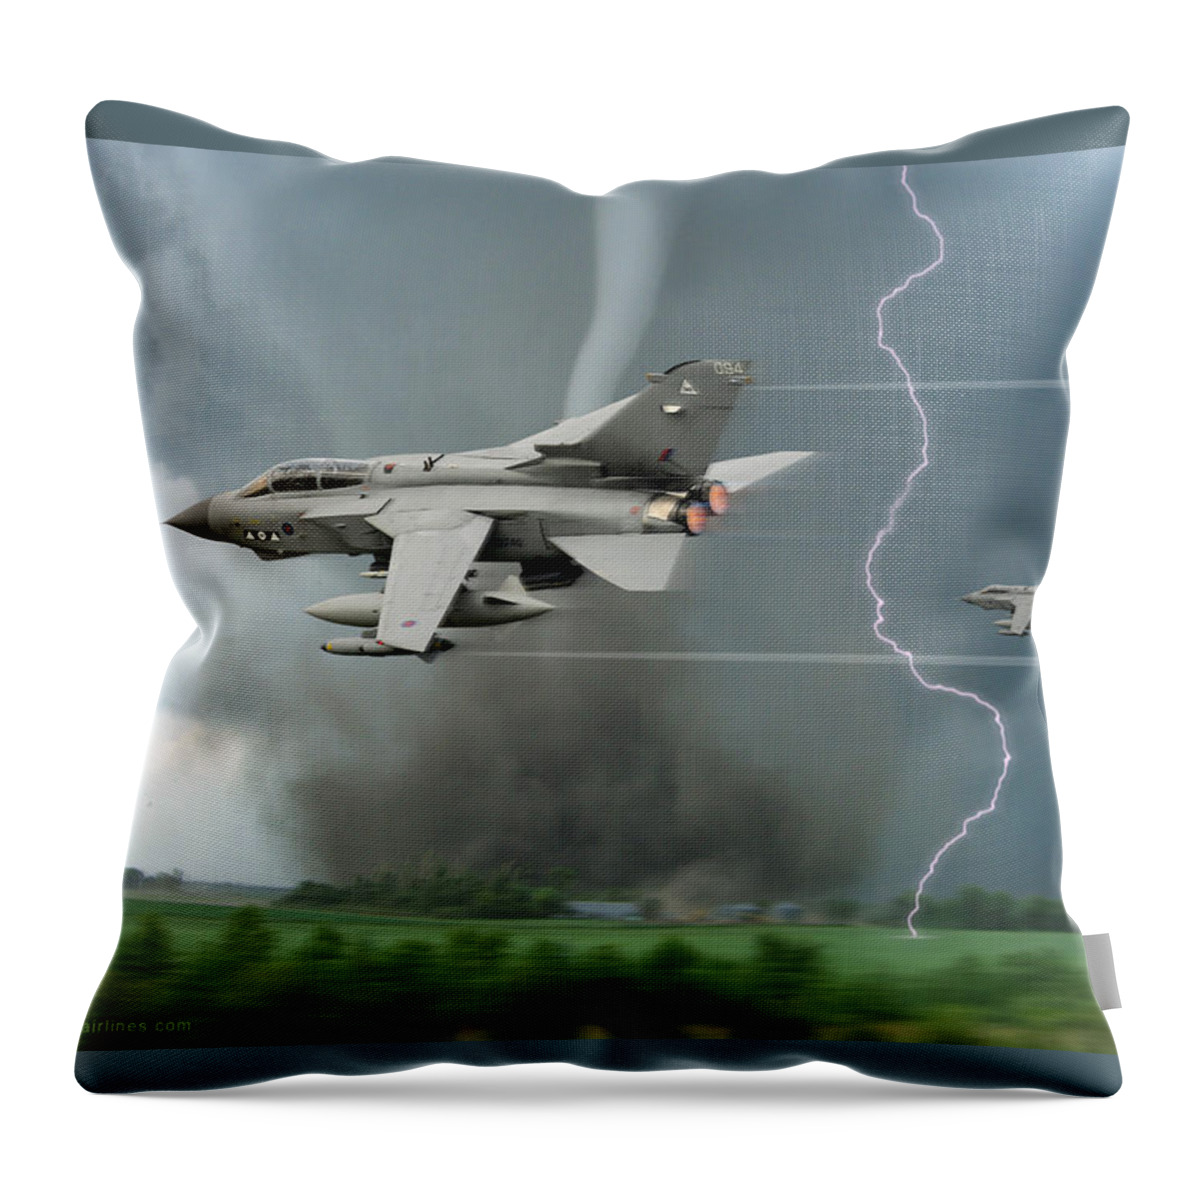 Panavia Throw Pillow featuring the digital art Tornados In The Storm by Custom Aviation Art